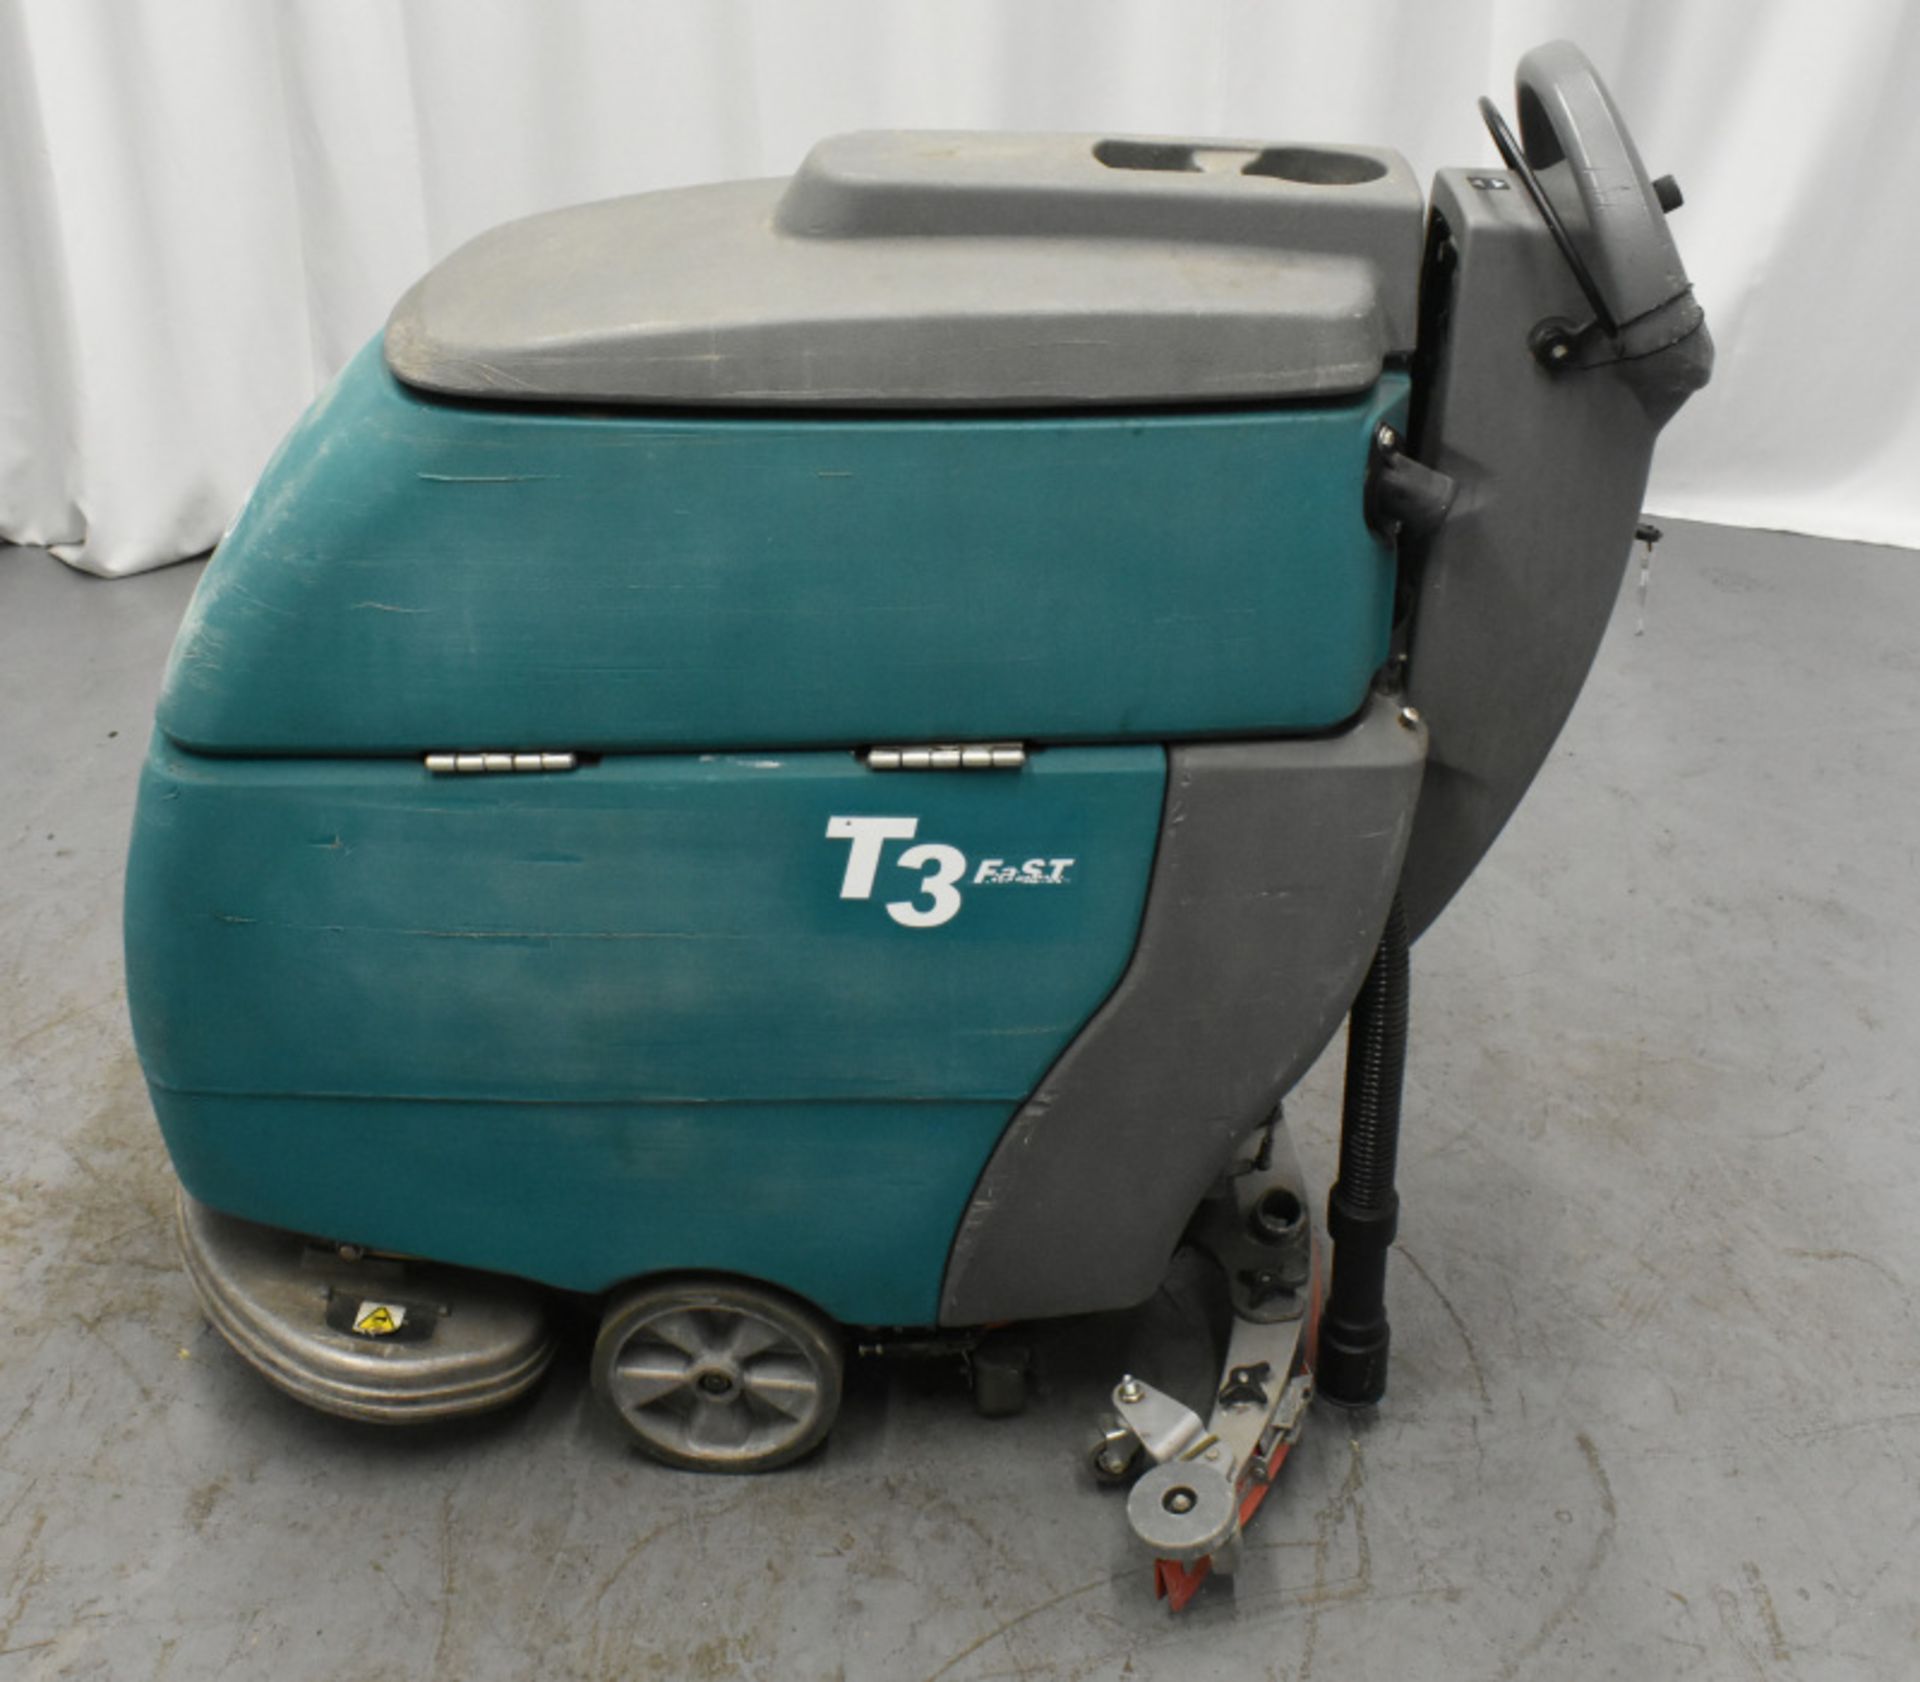 Tennant T3 Fast, comes with key and working charger, starts and runs,1968 hours - Image 7 of 9